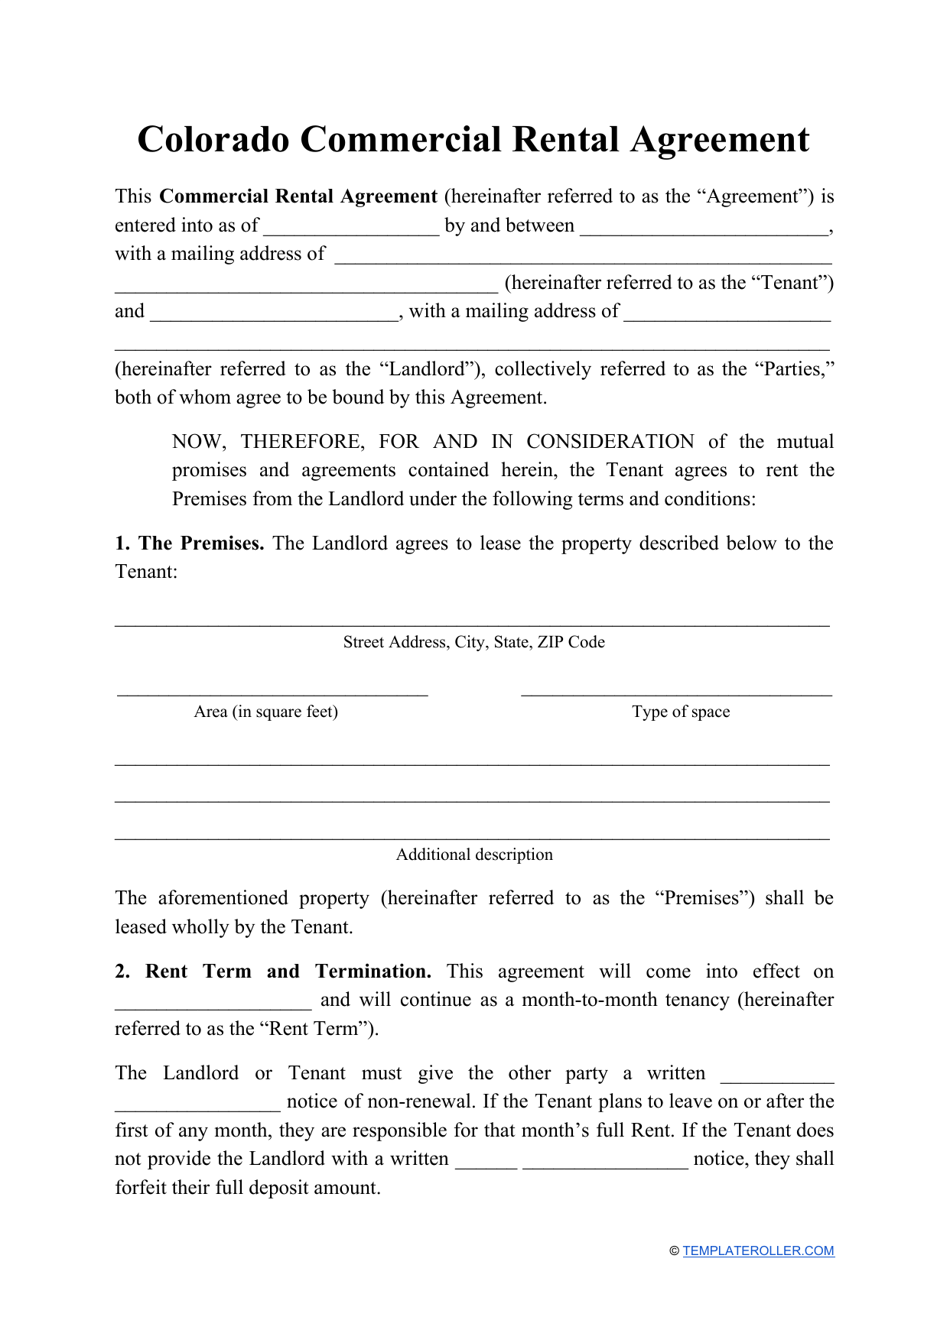 colorado-commercial-rental-agreement-template-fill-out-sign-online